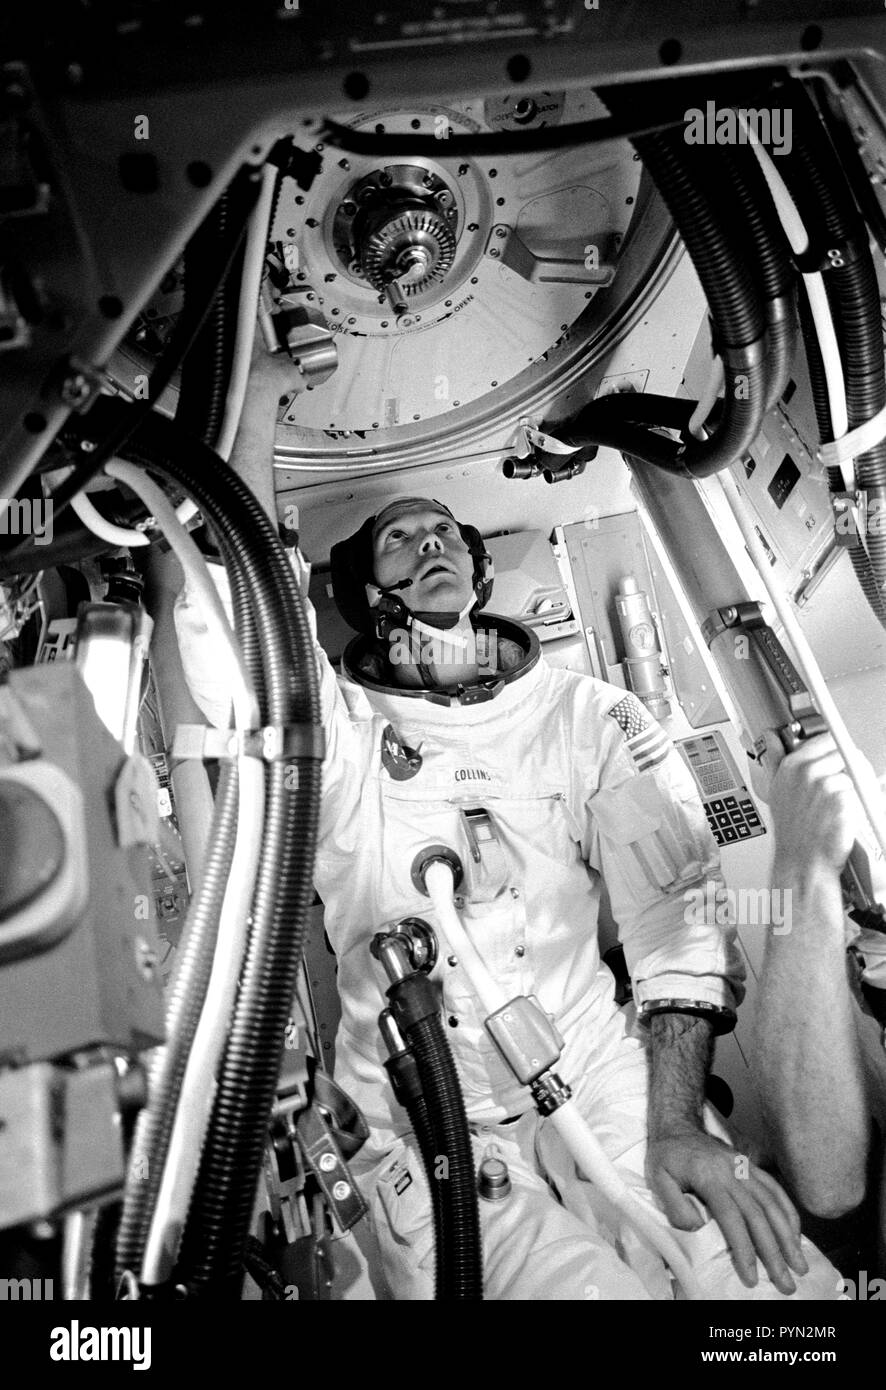 Astronaut Michael Collins, command module pilot of the Apollo 11 flight, is seen inside an Apollo Command Module (CM) mockup in Building 5 practicing procedures with the Apollo docking mechanism in preparation for the scheduled Apollo 11 lunar landing mission. Stock Photo